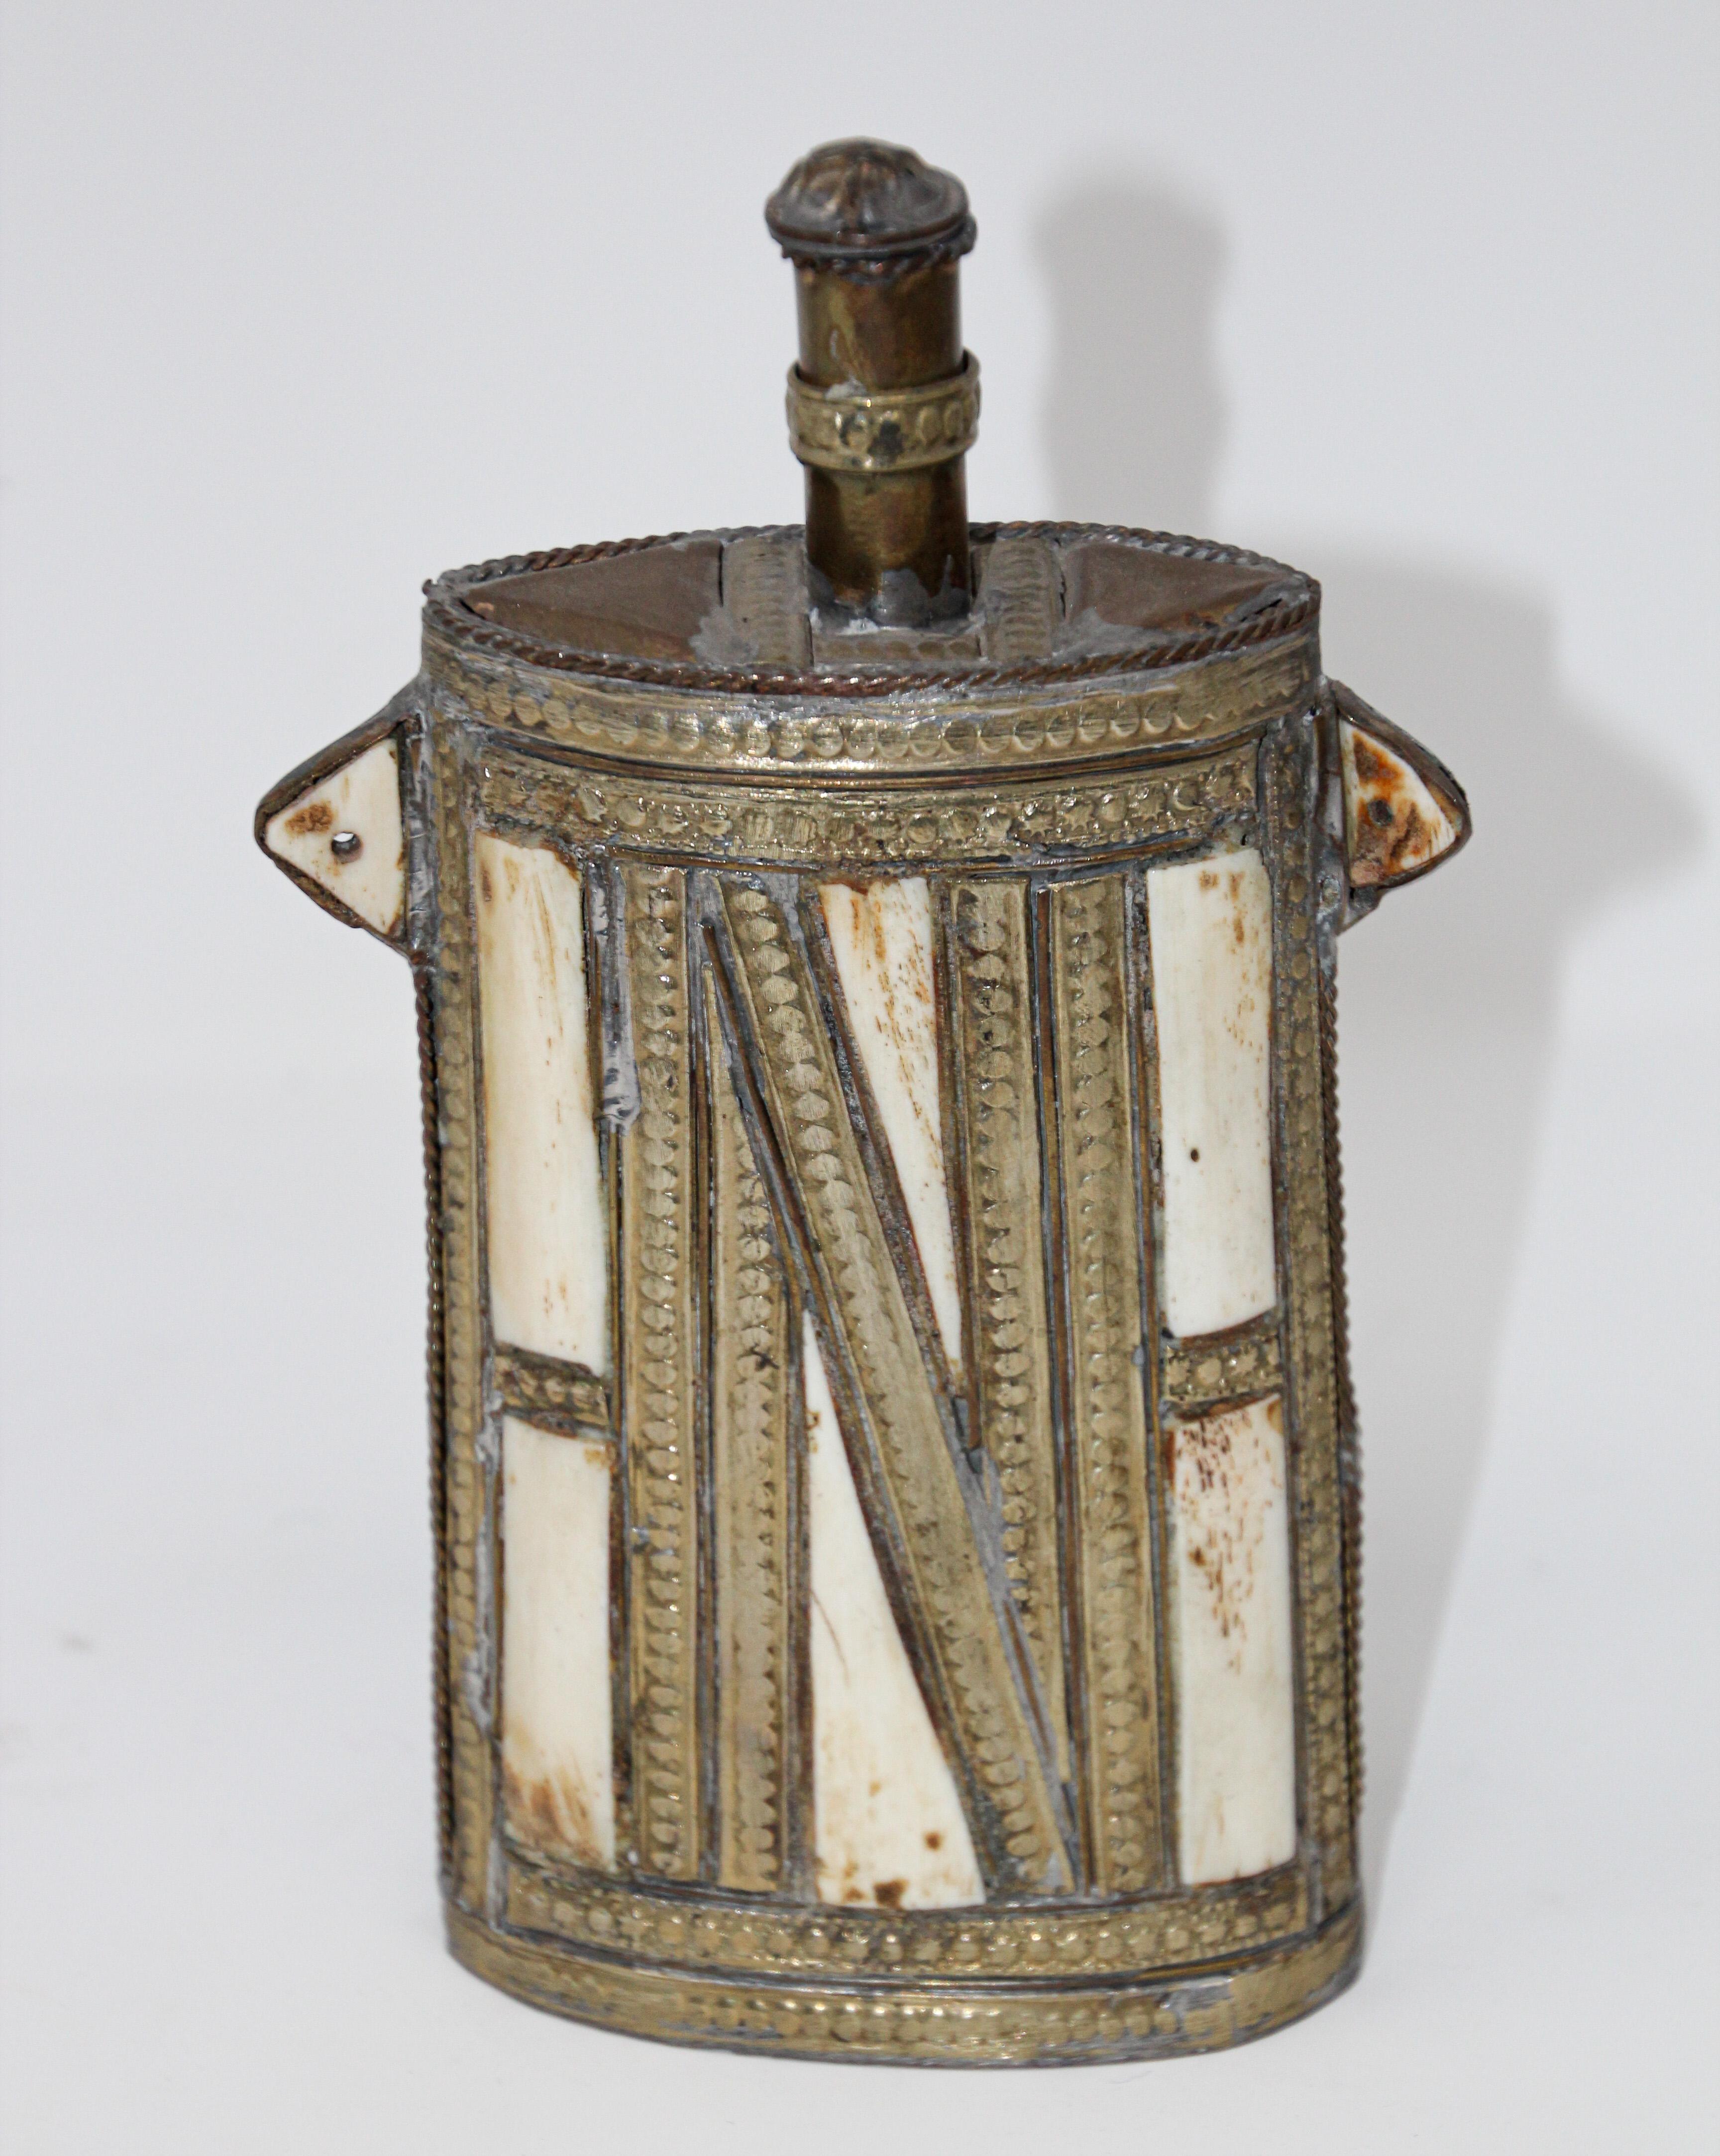 Great decorative Moroccan Berber Tuareg metal brass powder flask. African decorative brass with front richly decorated with Moorish embossed brass ocverlay. Moroccan tribal powder flasks, the valve stem turns and open. Truly a conversation museum